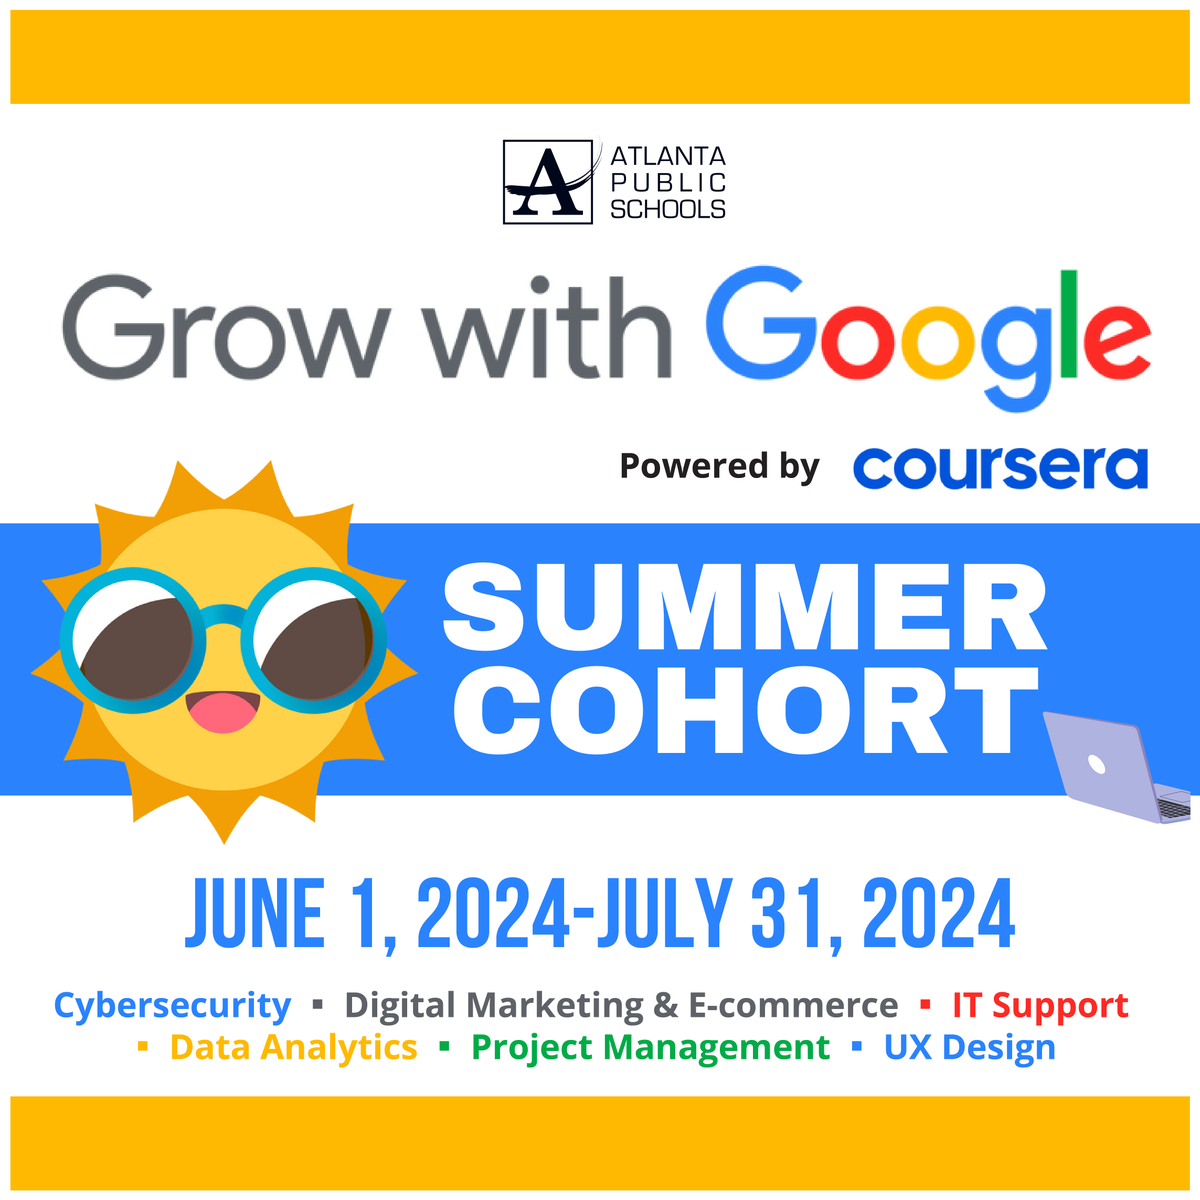 🚀 Ready to LEVEL UP your summer with Grow with Google? 🌟 Apply today to earn official Google certificates! The Grow with Google Summer Cohort runs from June 1 to July 31. Let's make this summer one to remember! 💻📈 #GrowWithGoogle Sign-up ends May 28! bit.ly/3QI5css